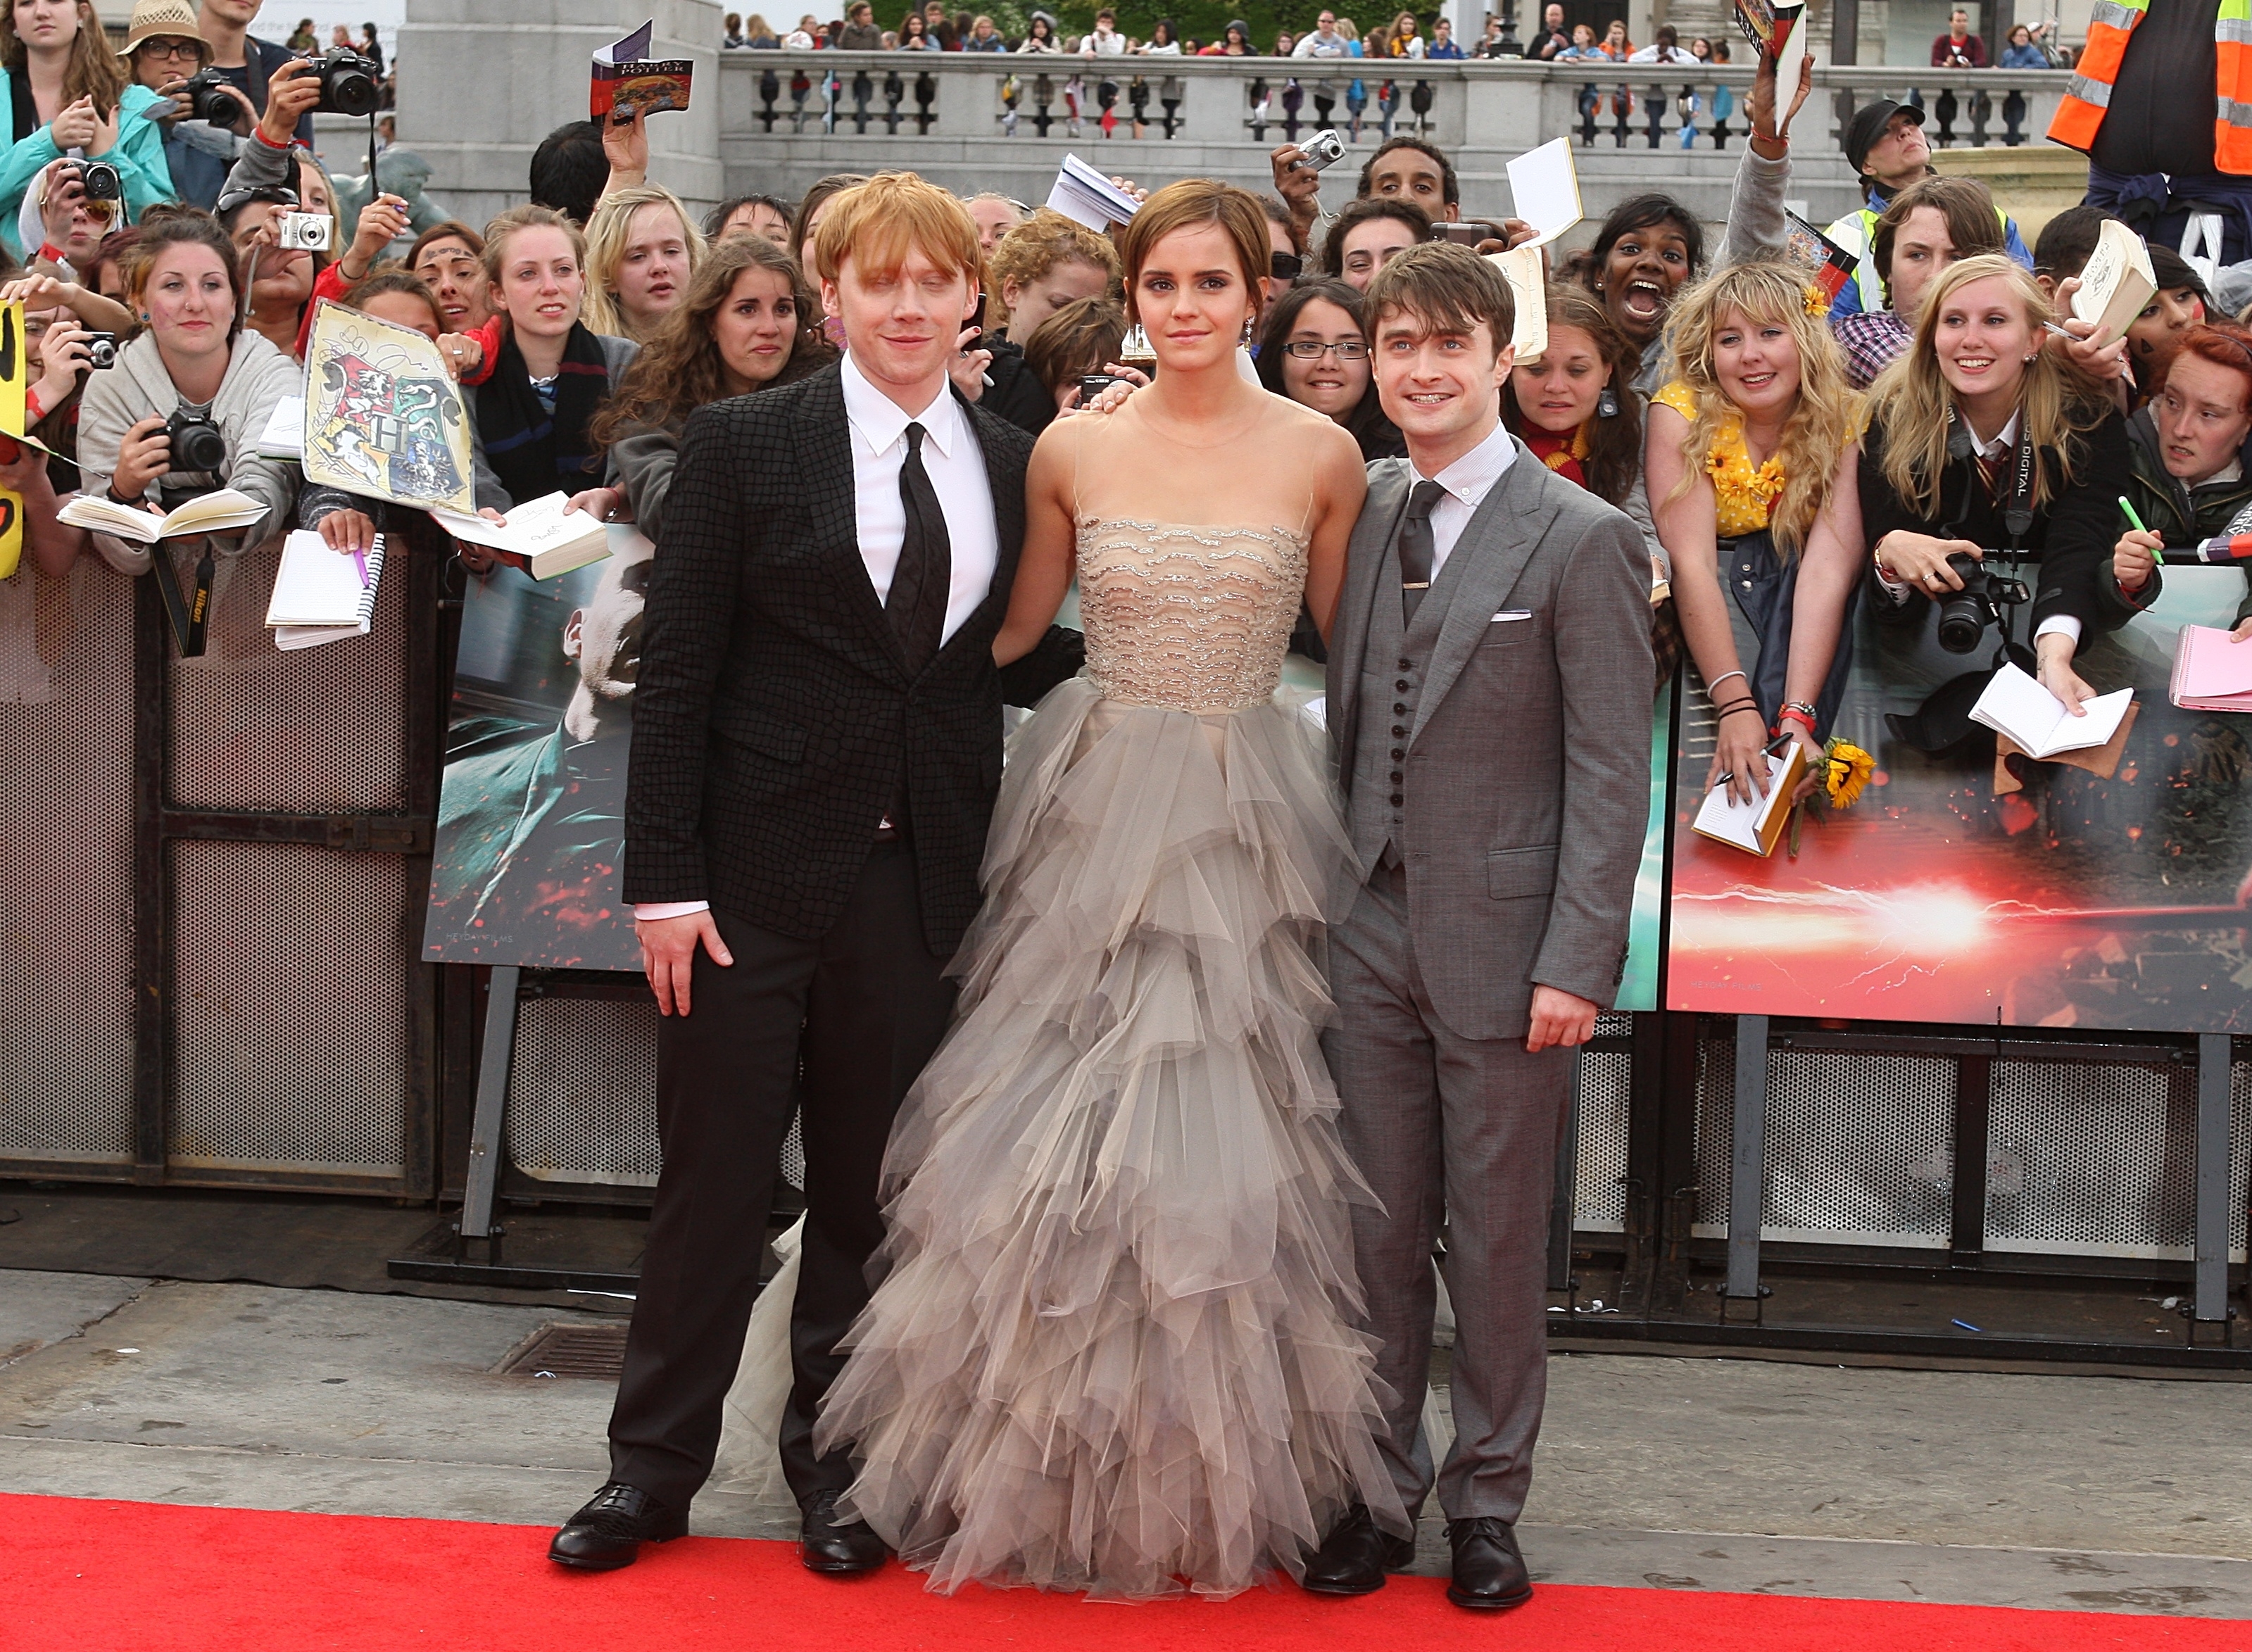 From left to right: Rupert, Emma, and Daniel on the red carpet